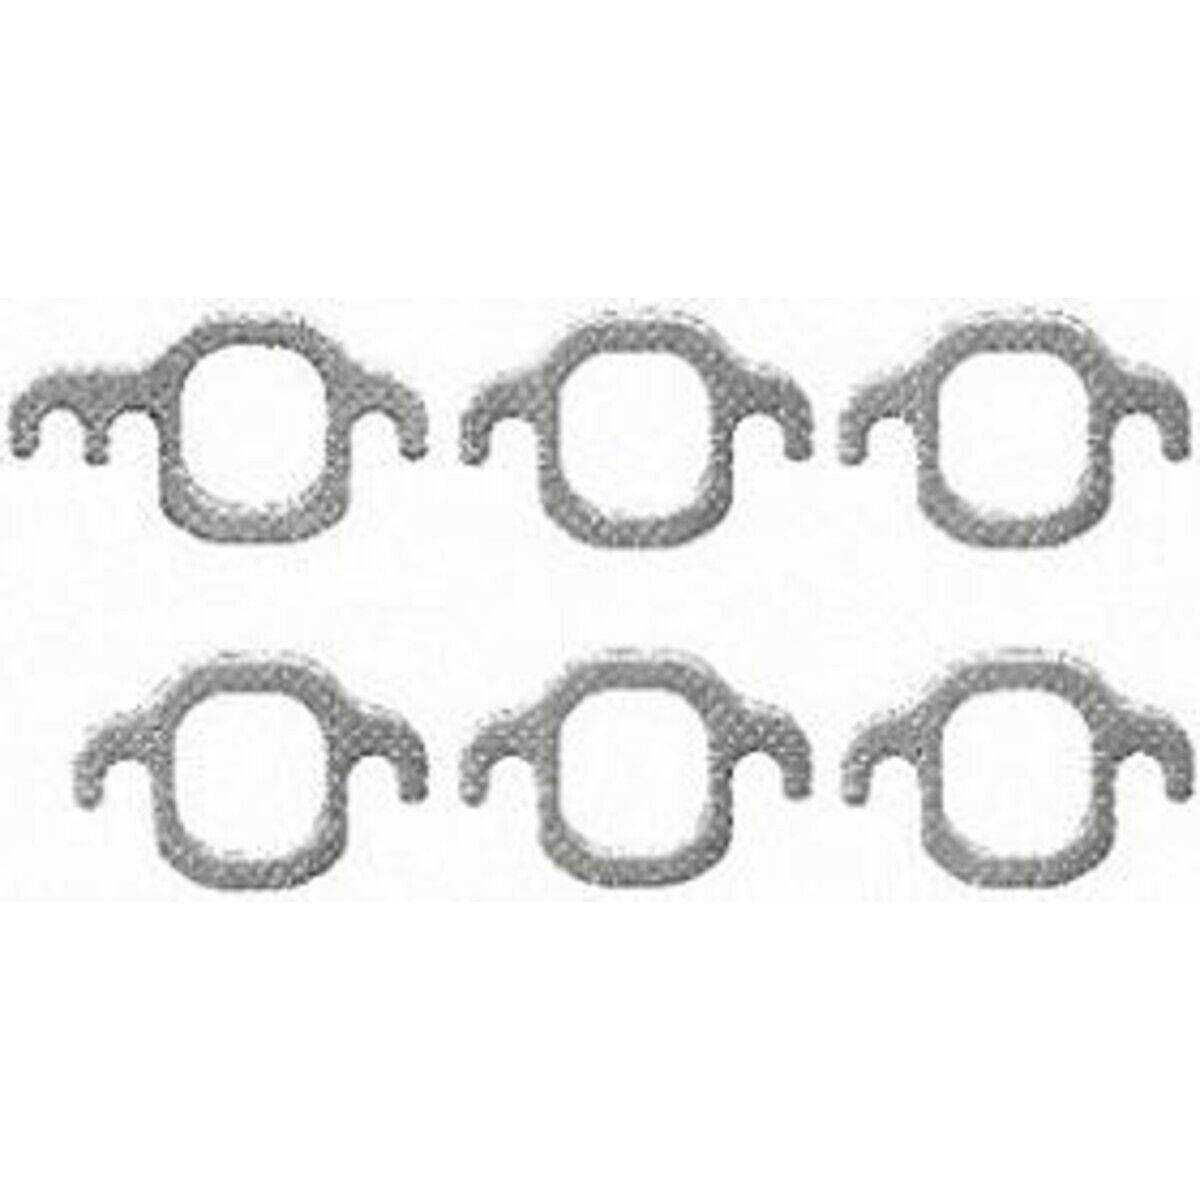 MS90746 Felpro Exhaust Manifold Gaskets Set for Chevy Olds Express Van SaVana